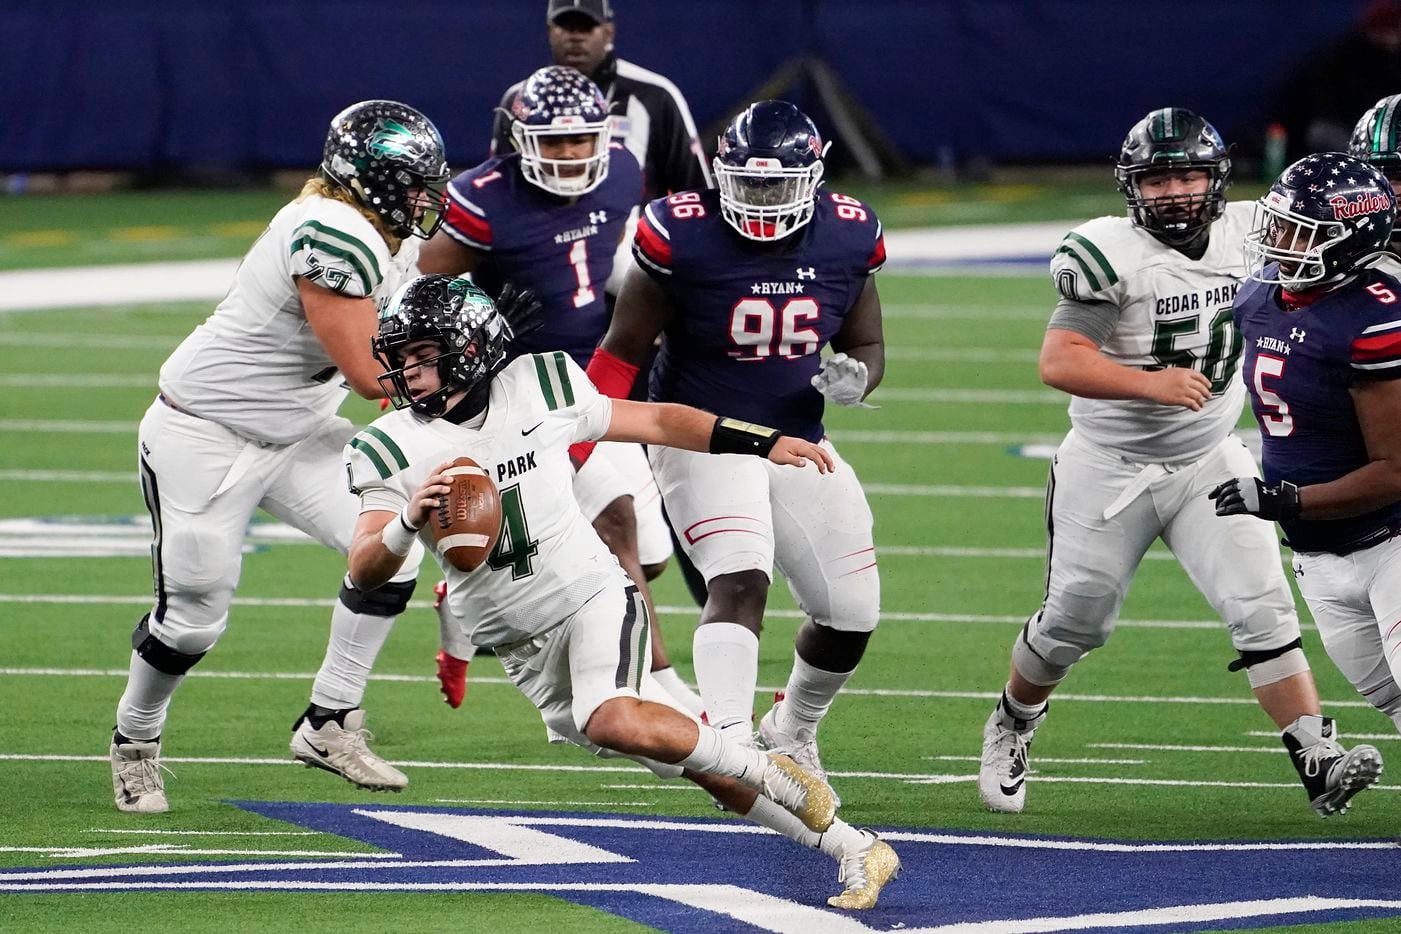 Cedar Park quarterback Ryder Hernandez (4) is flushed from the pocket by Denton Ryan defensive lineman Bear Alexander (96) during the second half of the Class 5A Division I state football championship game at AT&T Stadium on Friday, Jan. 15, 2021, in Arlington, Texas. Ryan won the game 59-14. (Smiley N. Pool/The Dallas Morning News)